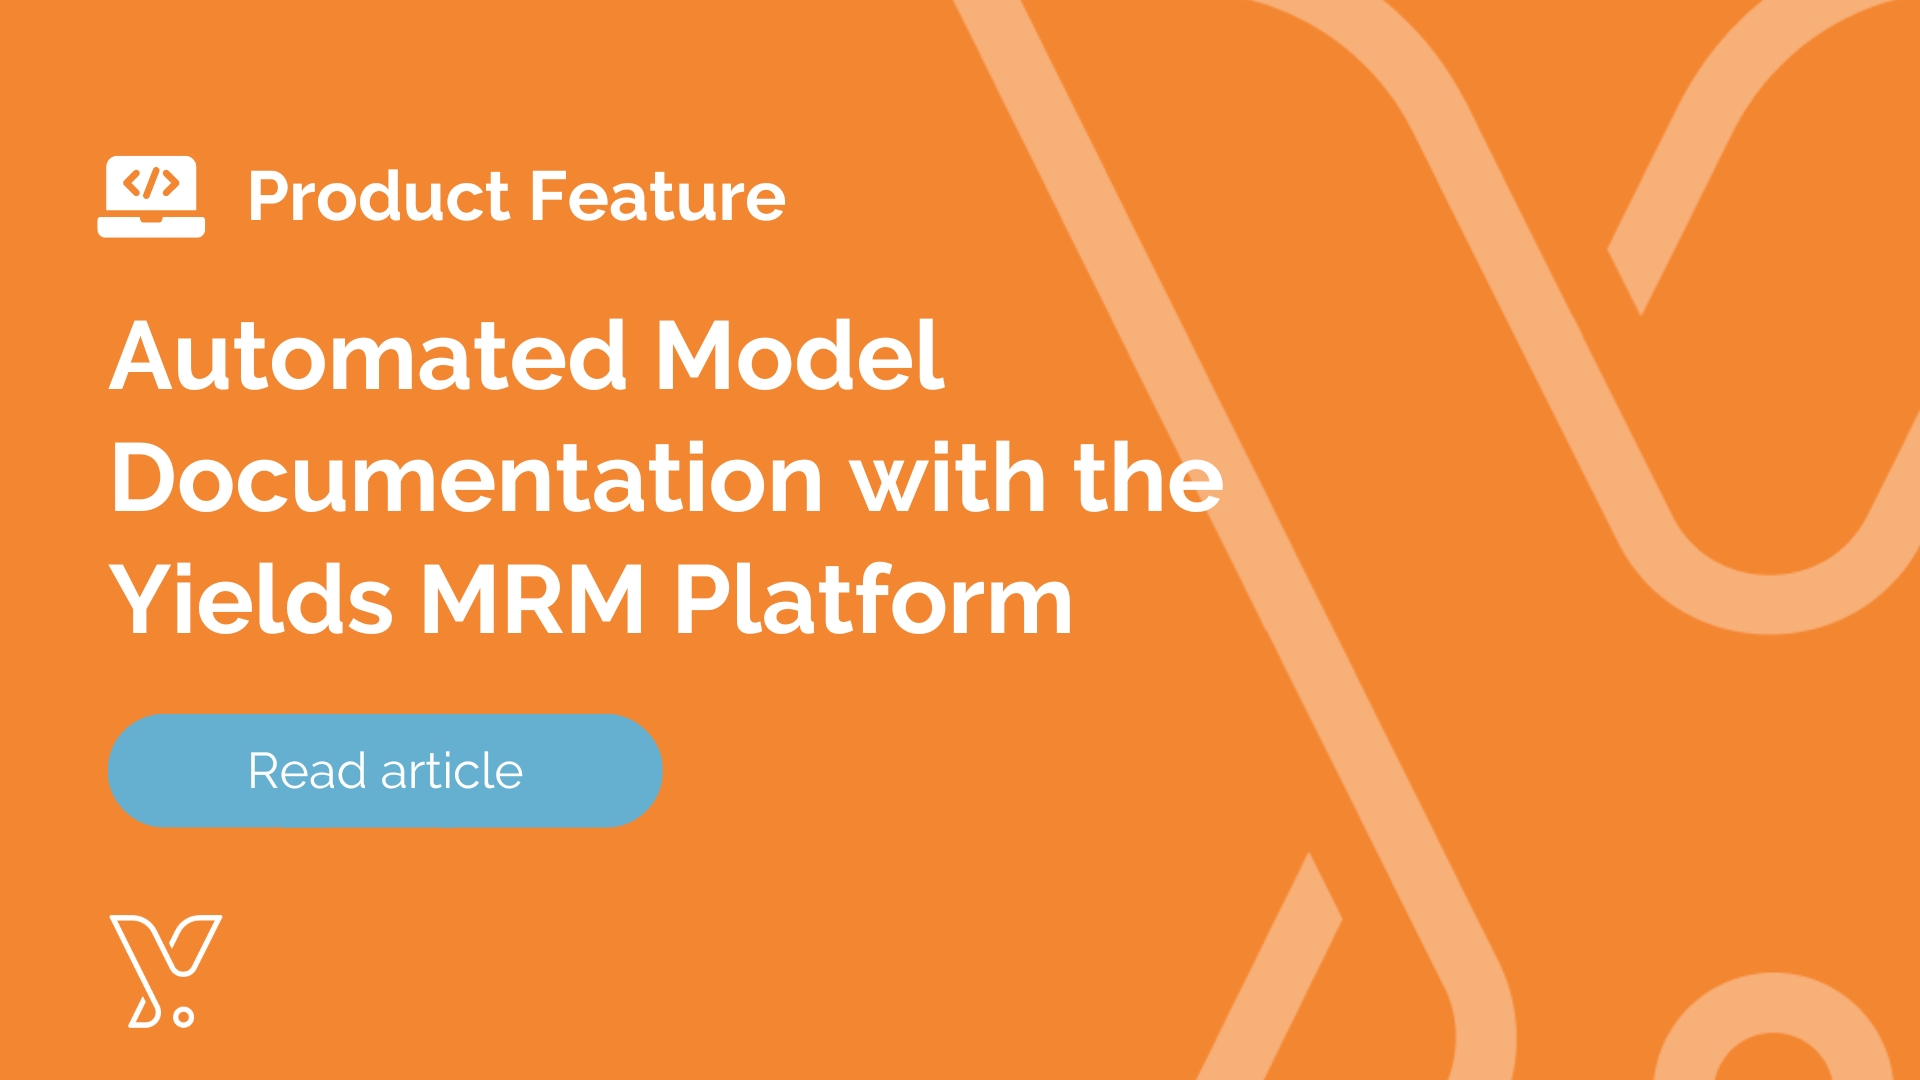 Automated Model Documentation with the Yields MRM Platform